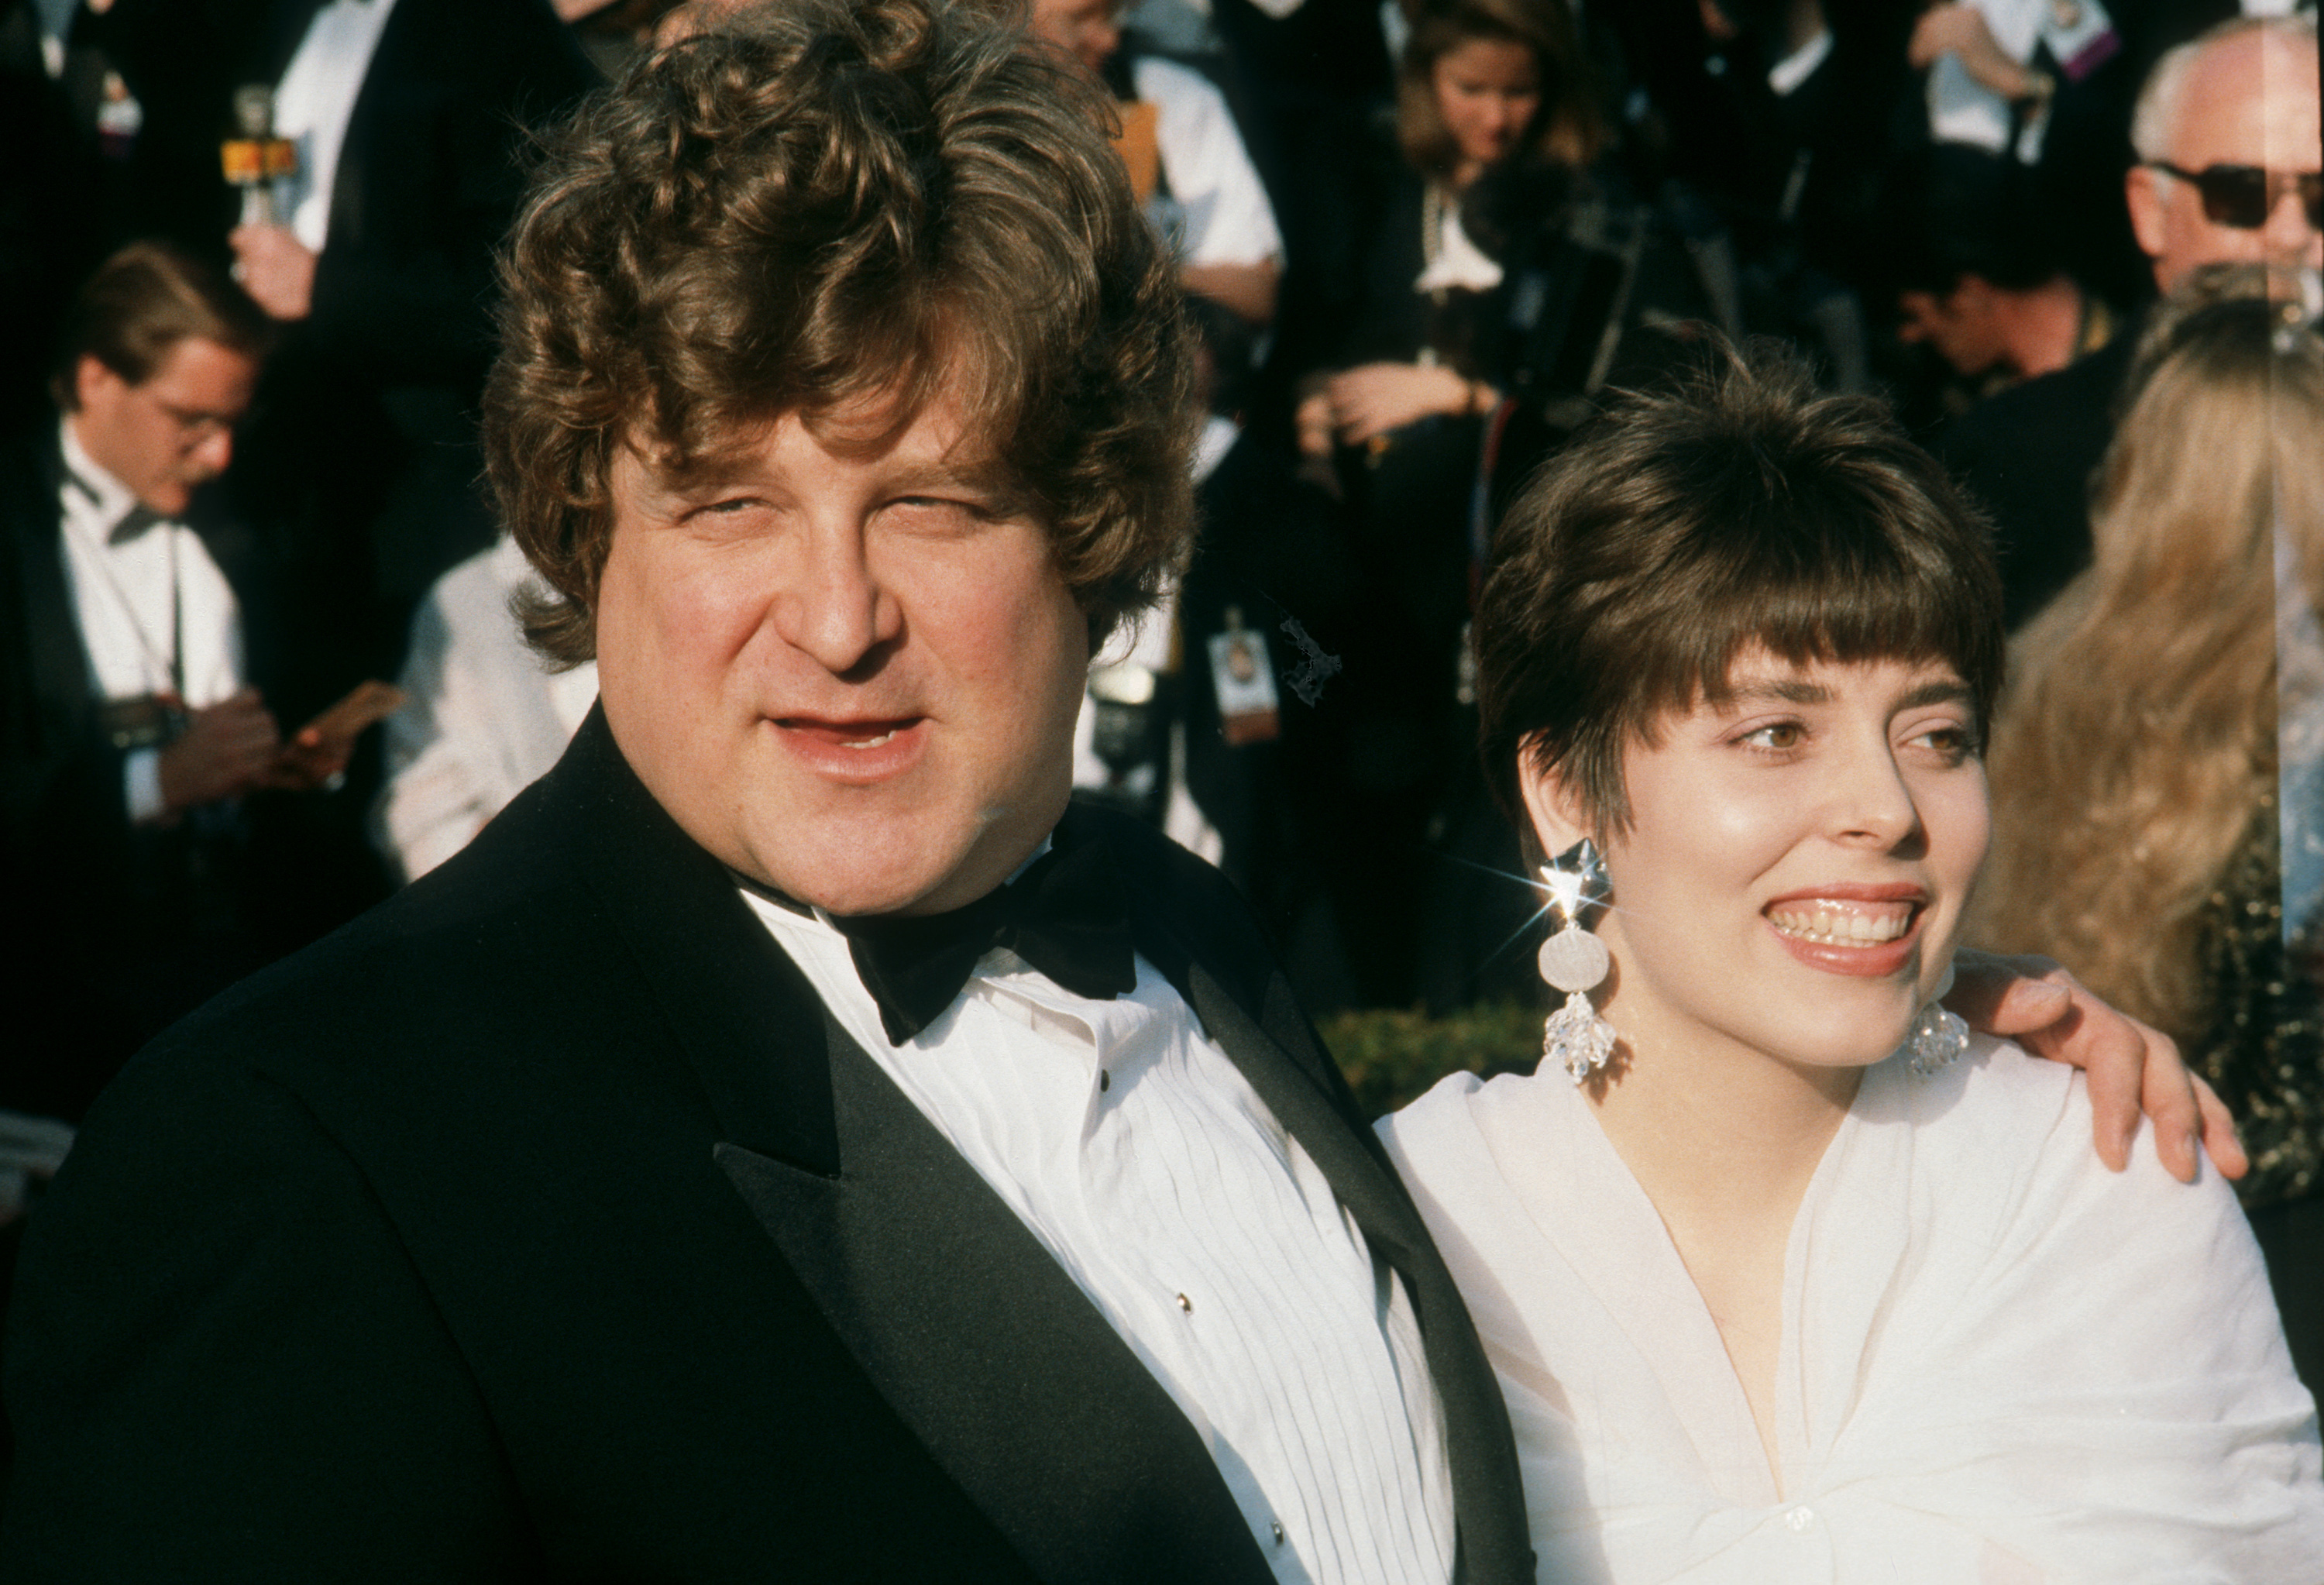 John Goodman and his wife Anna Beth Hartzog attend the 62nd Annual Academy Awards on March 26, 1990, at the Dorothy Chandler Pavilion in Los Angeles, California. | Source: Getty Images